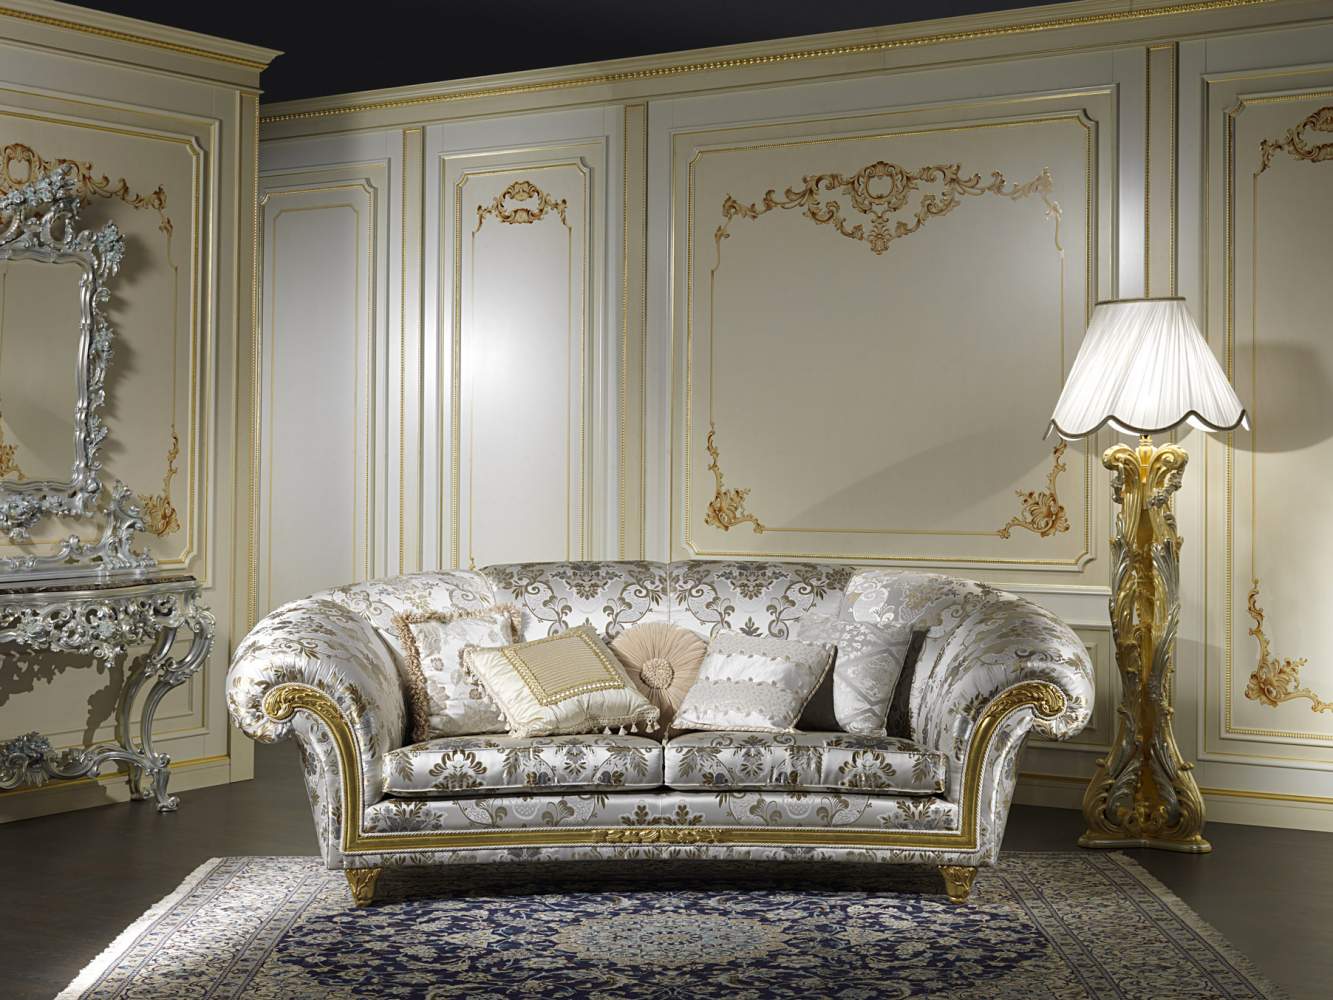 Furniture for a living room in classic style Palace